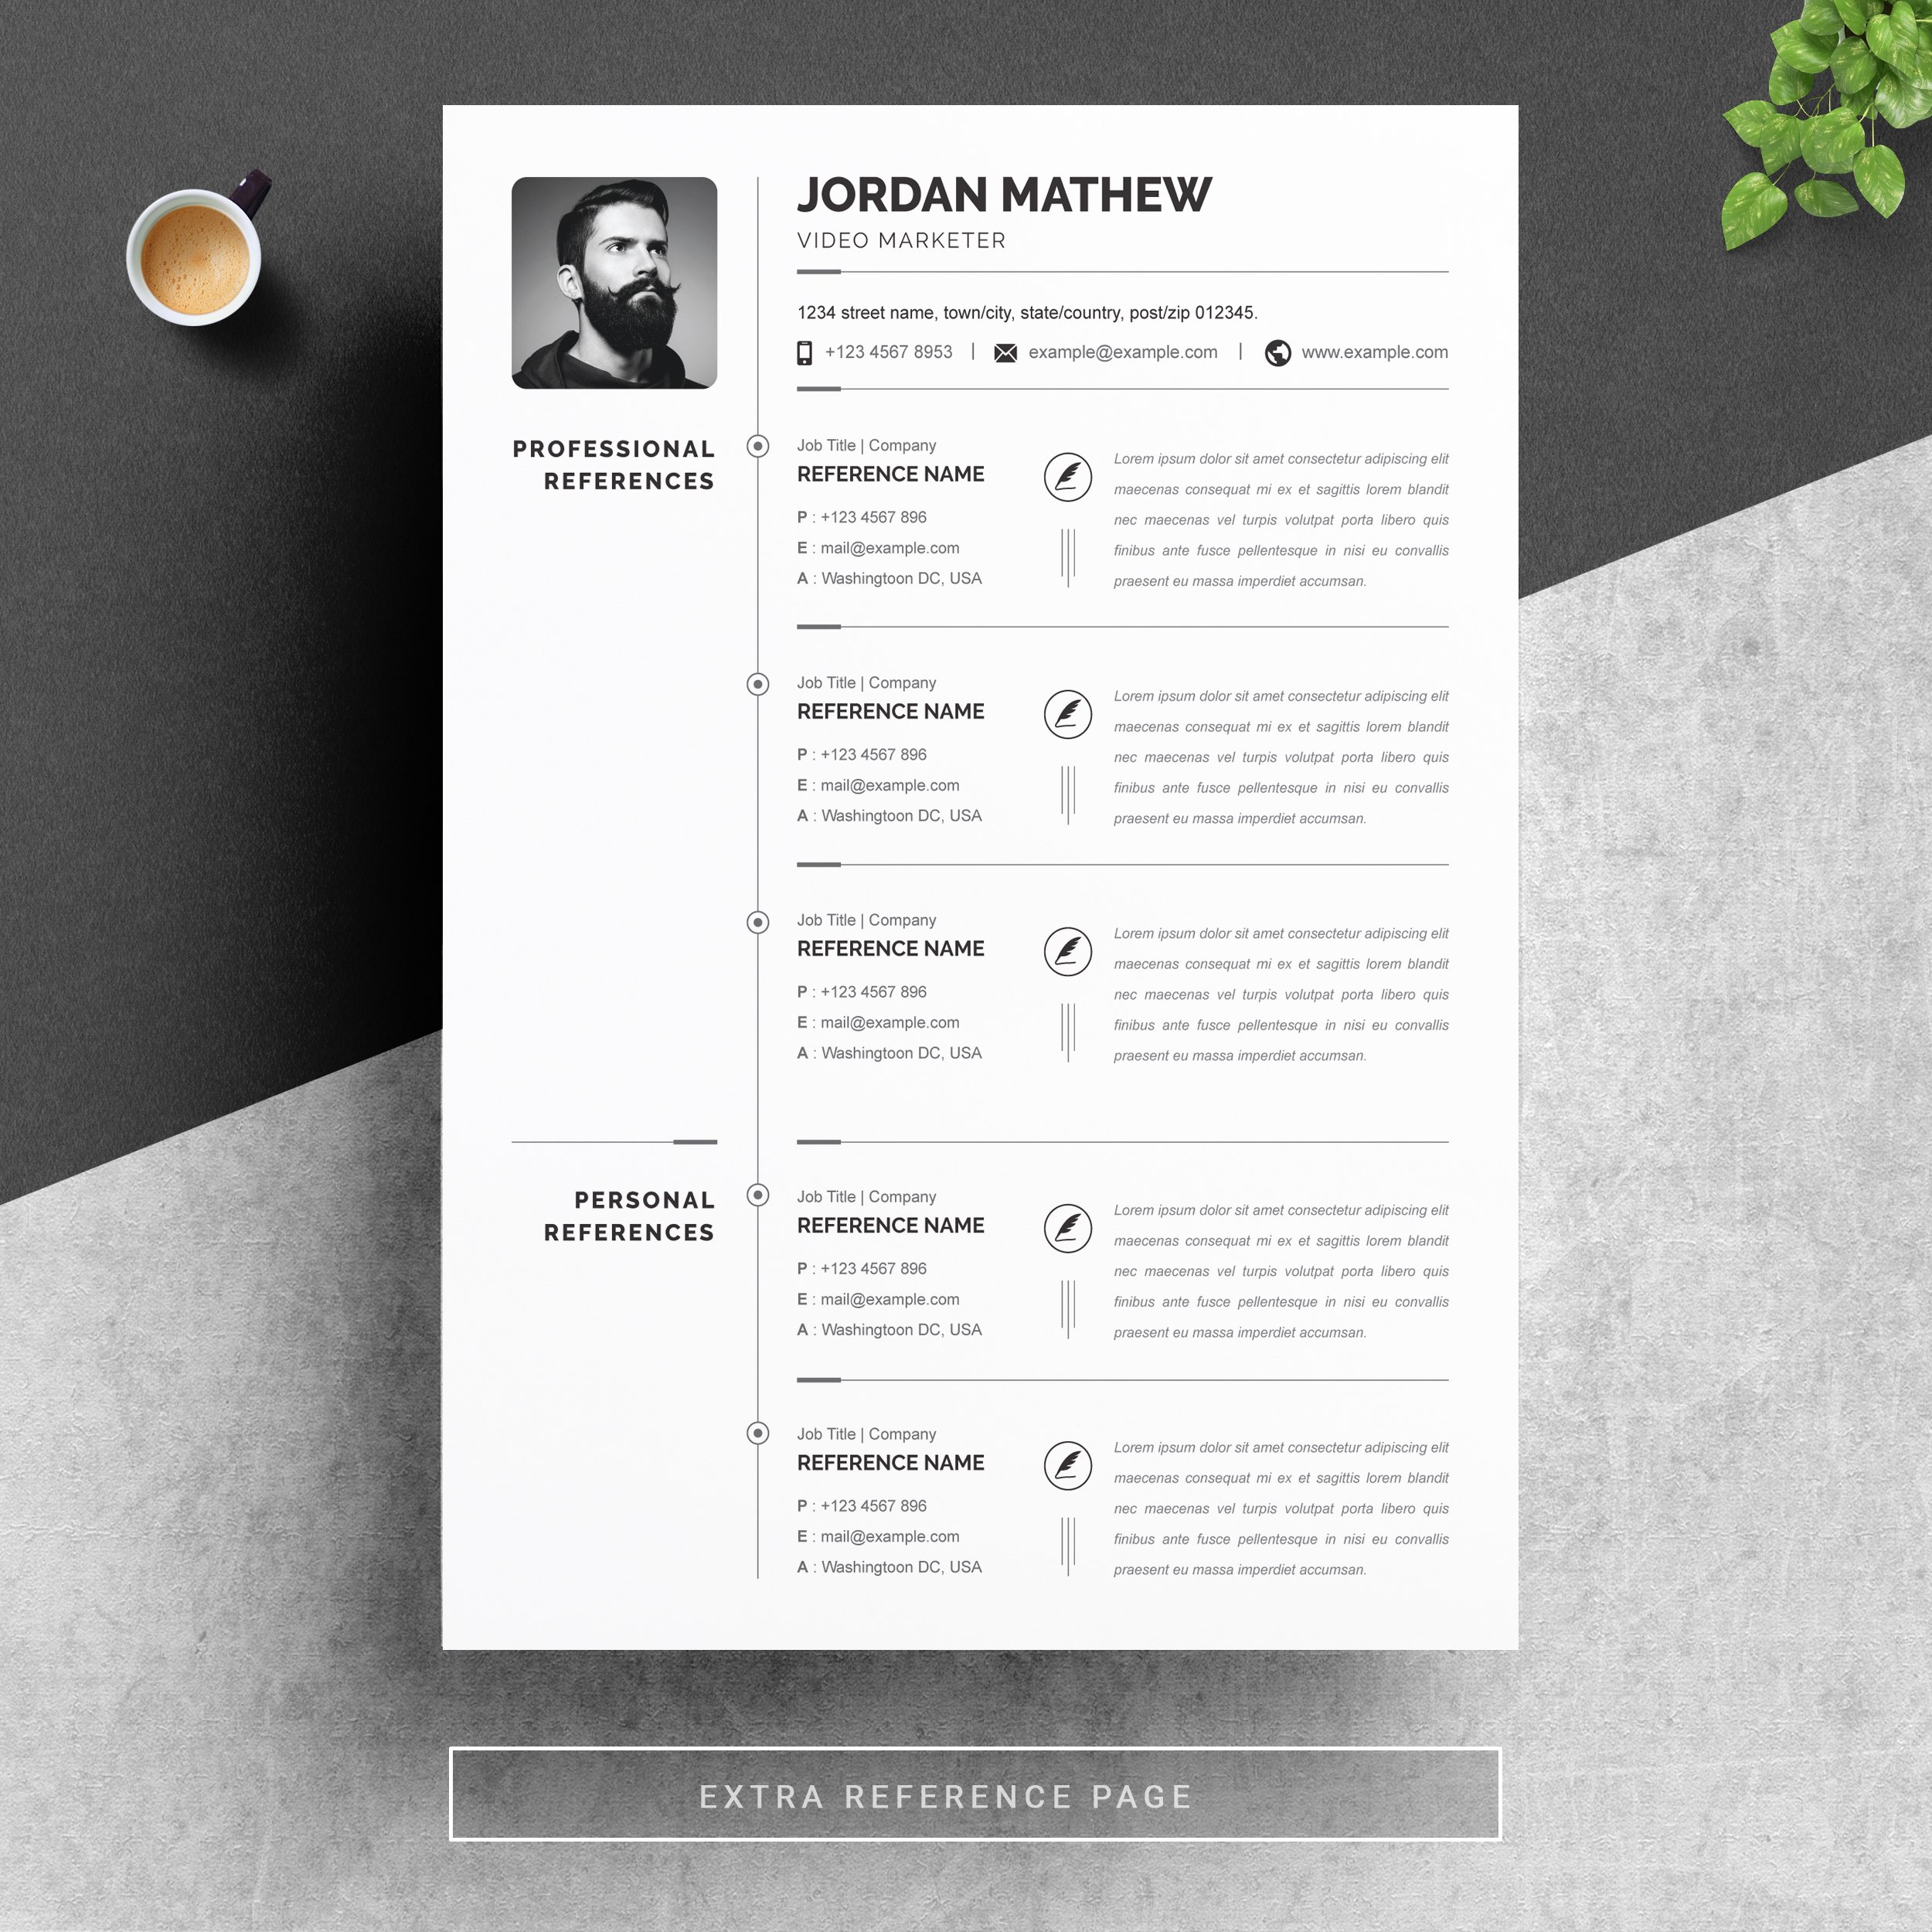 05 resume cover letter page free resume design template 407